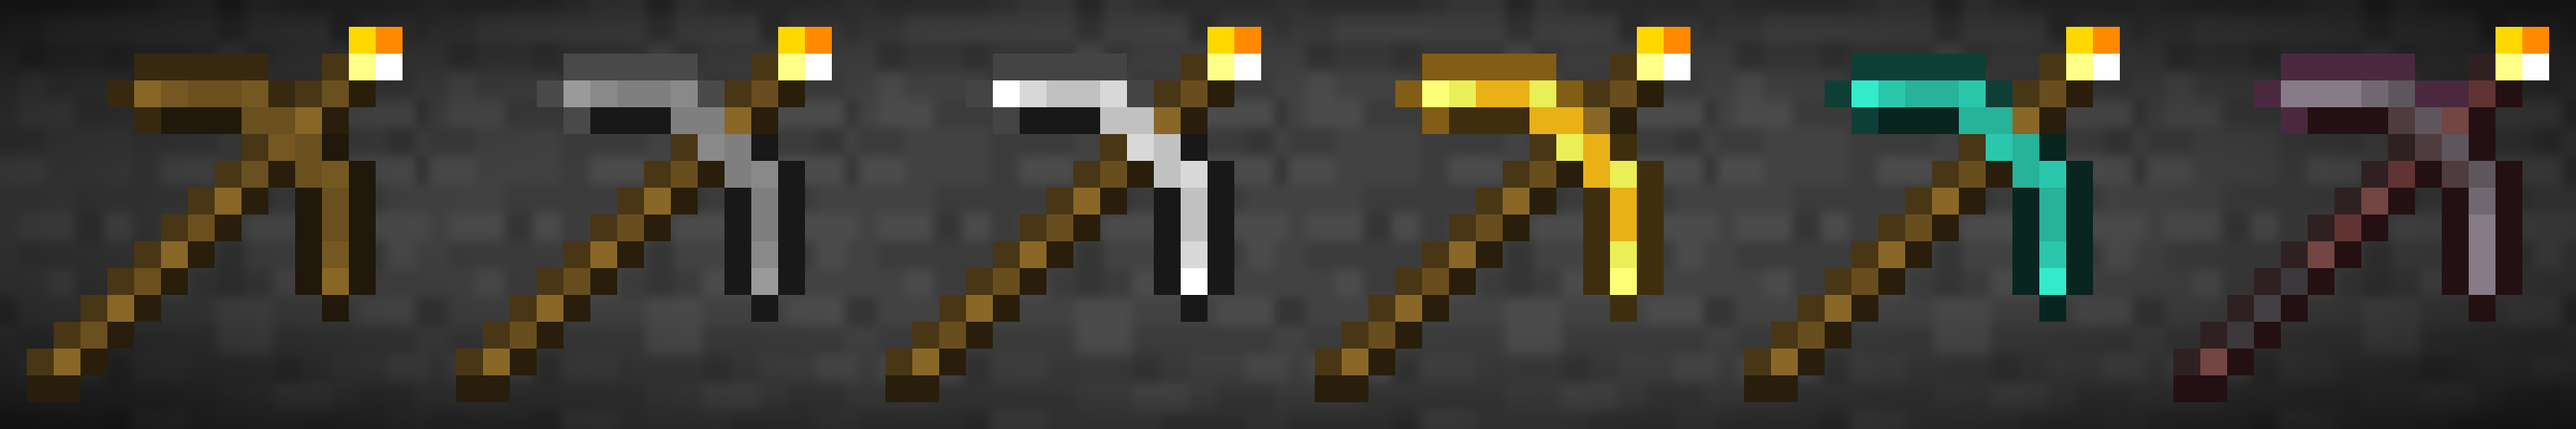 Image of glowing pickaxes